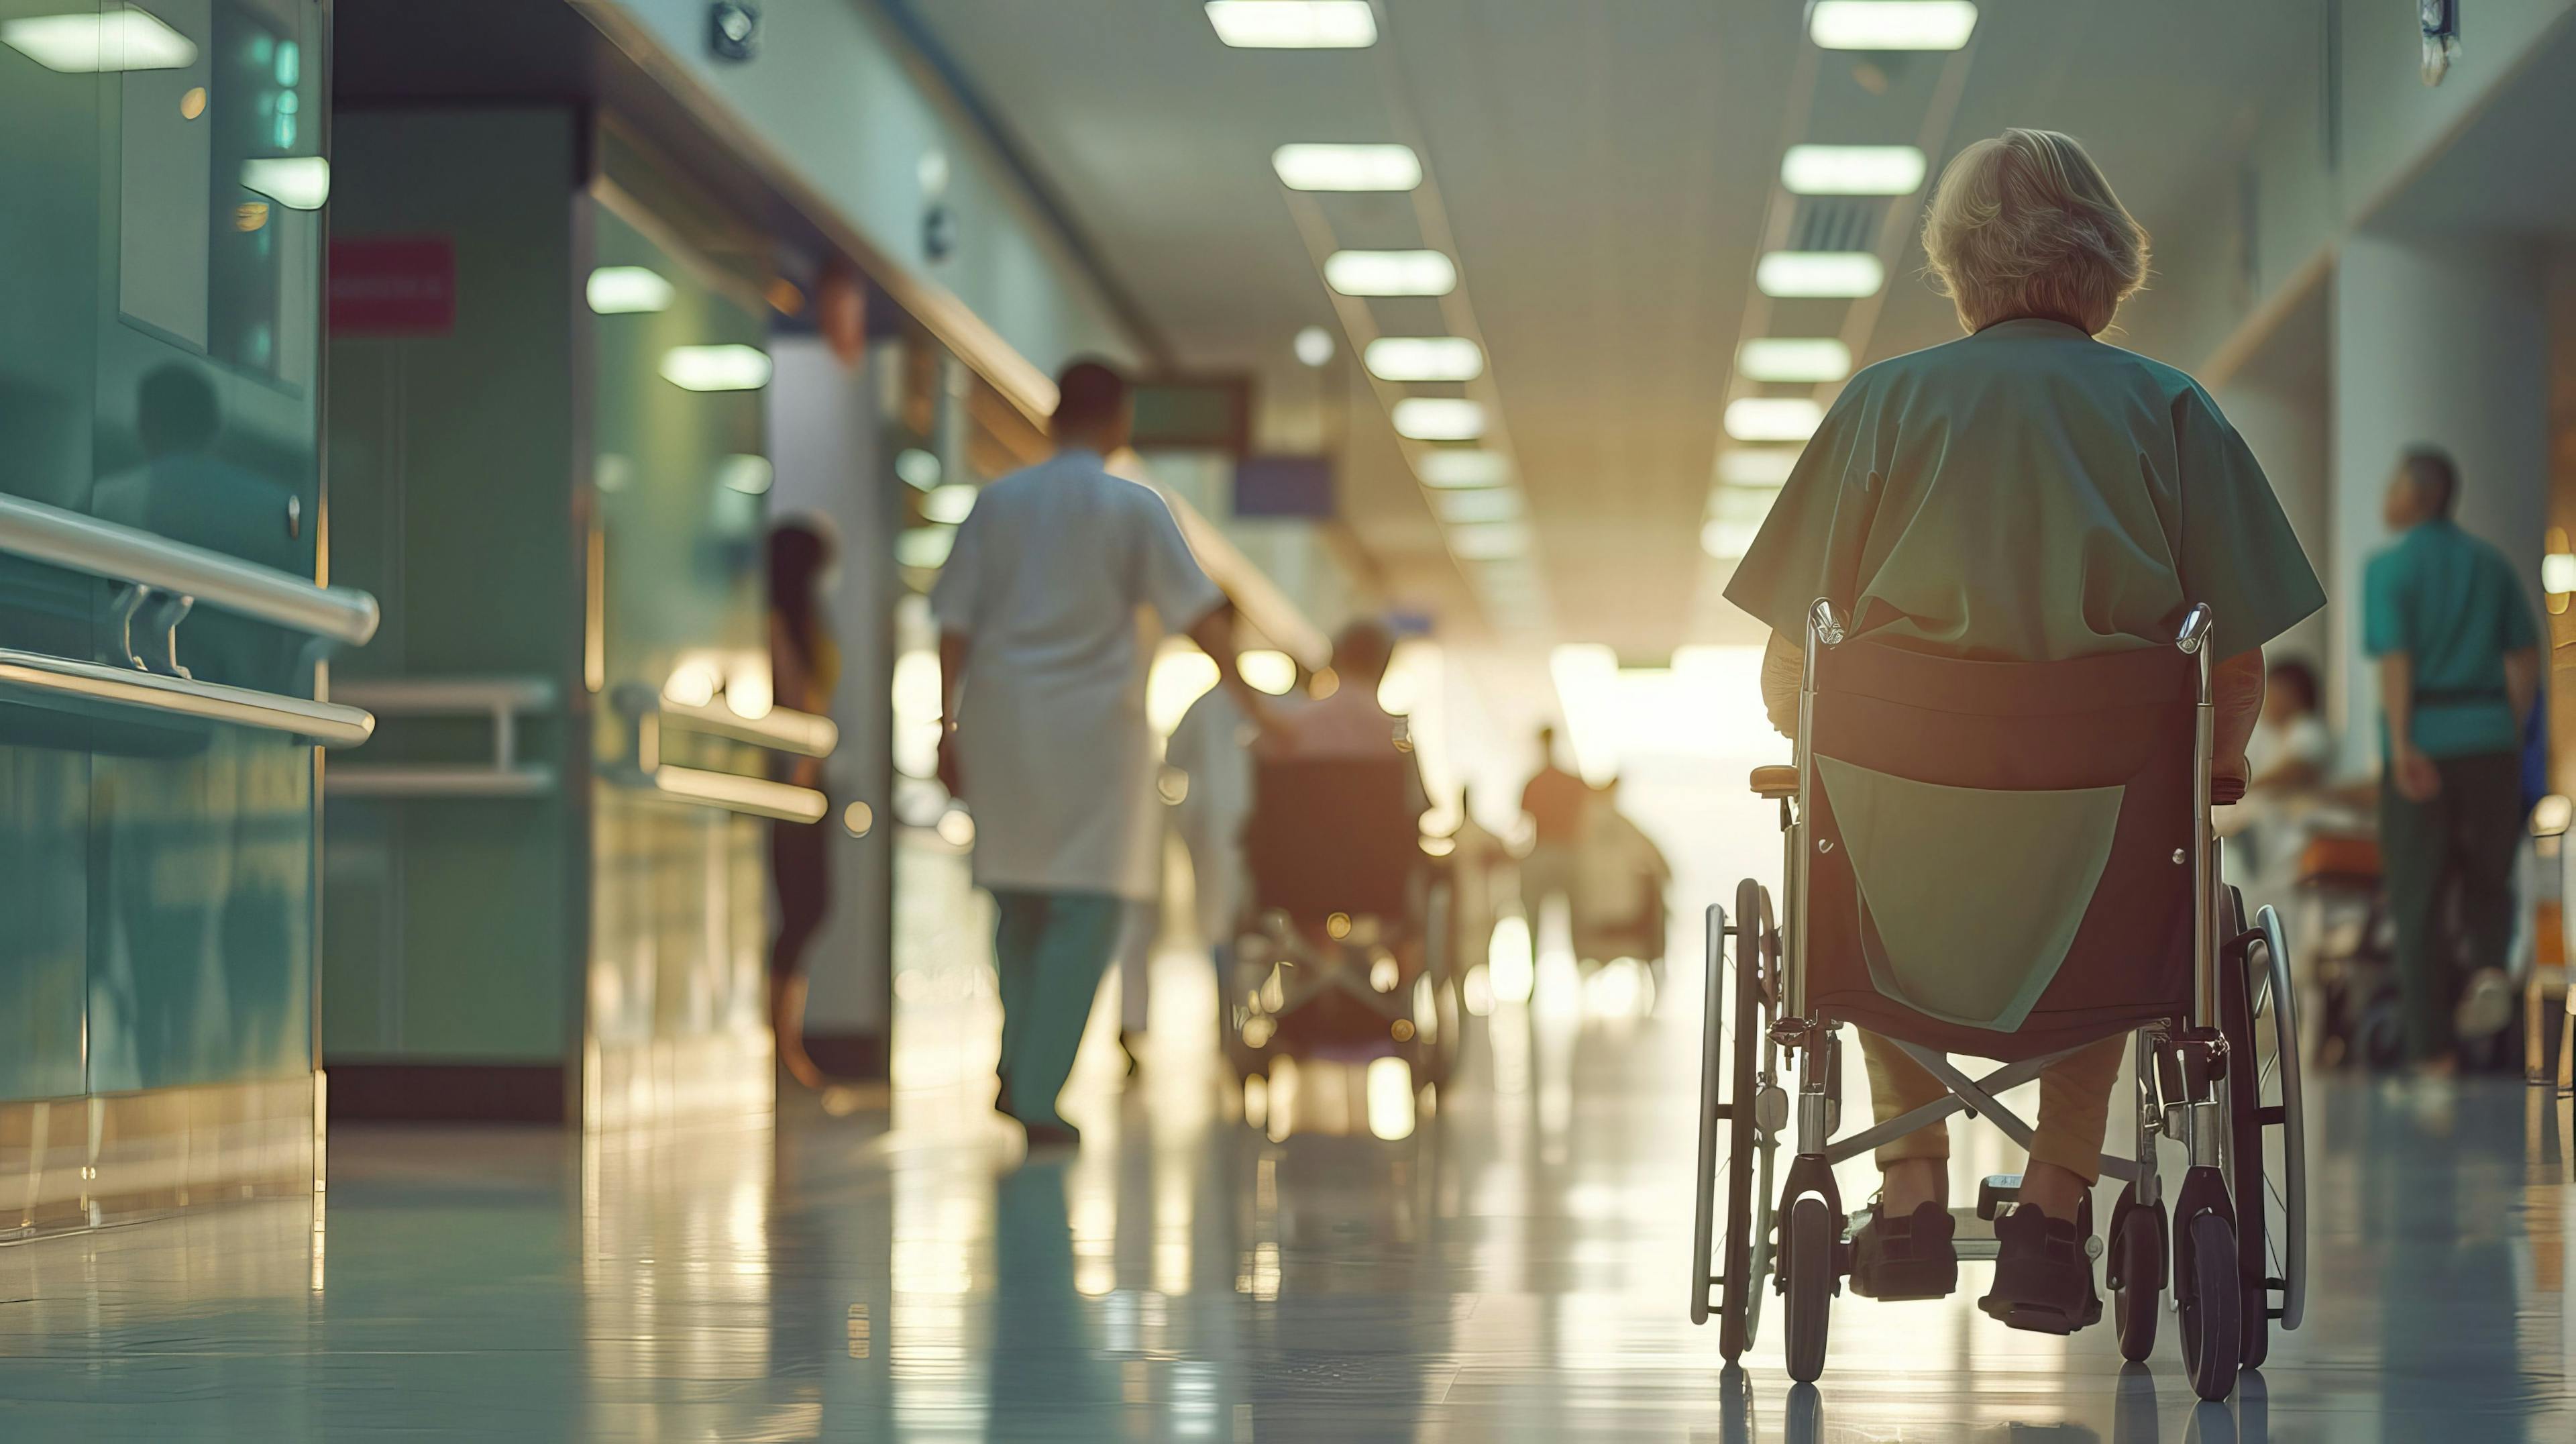 A nurse helps elderly people in a hospital. She helps them walk and ride in wheelchairs. | Image credit: © Suleyman - © stock.adobe.com